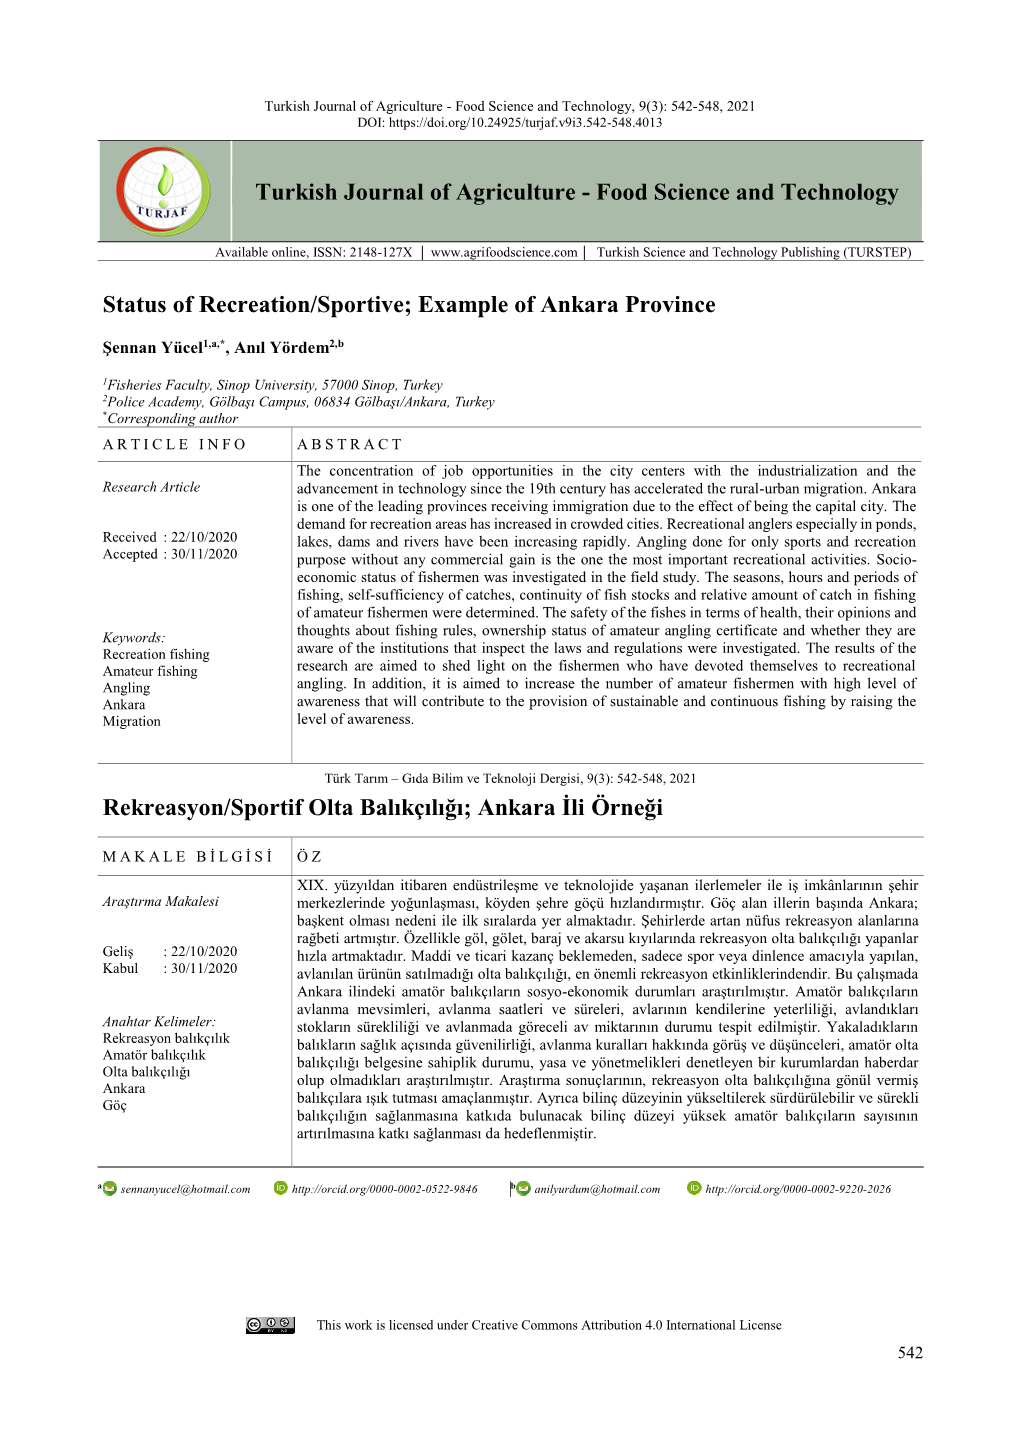 Turkish Journal of Agriculture - Food Science and Technology, 9(3): 542-548, 2021 DOI